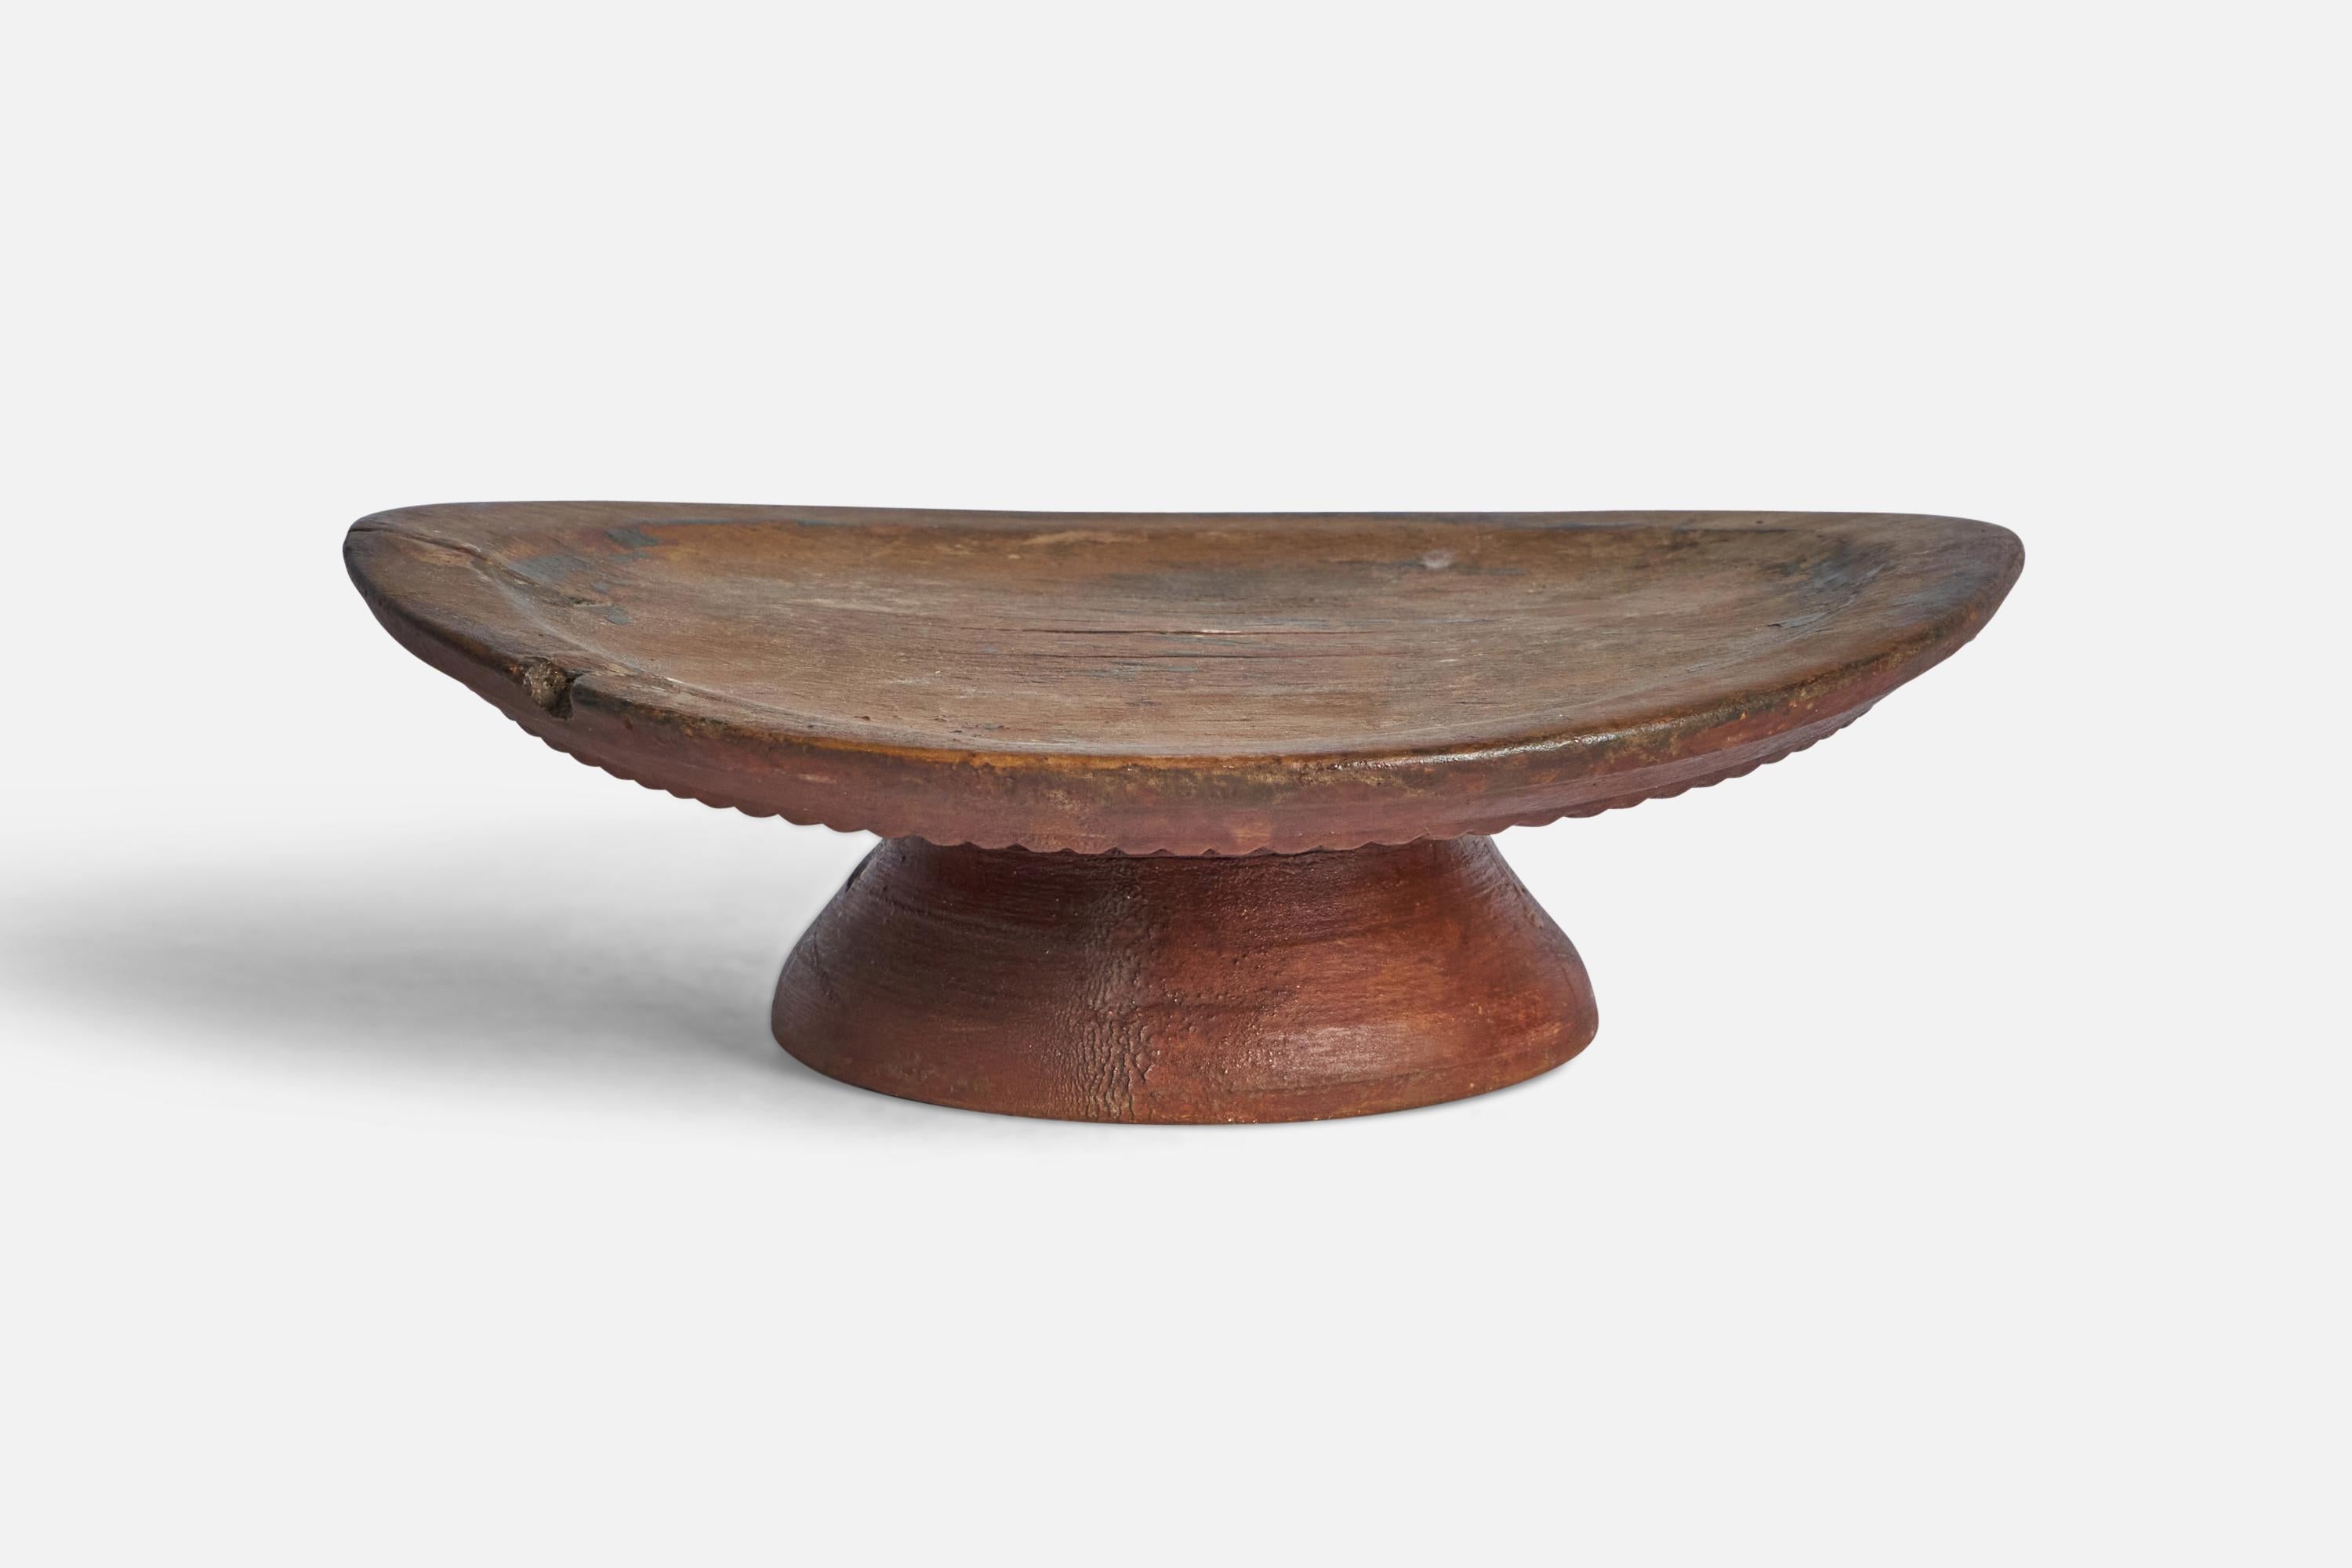 A wood serving dish produced in Sweden, 19th century.

“A” on bottom side